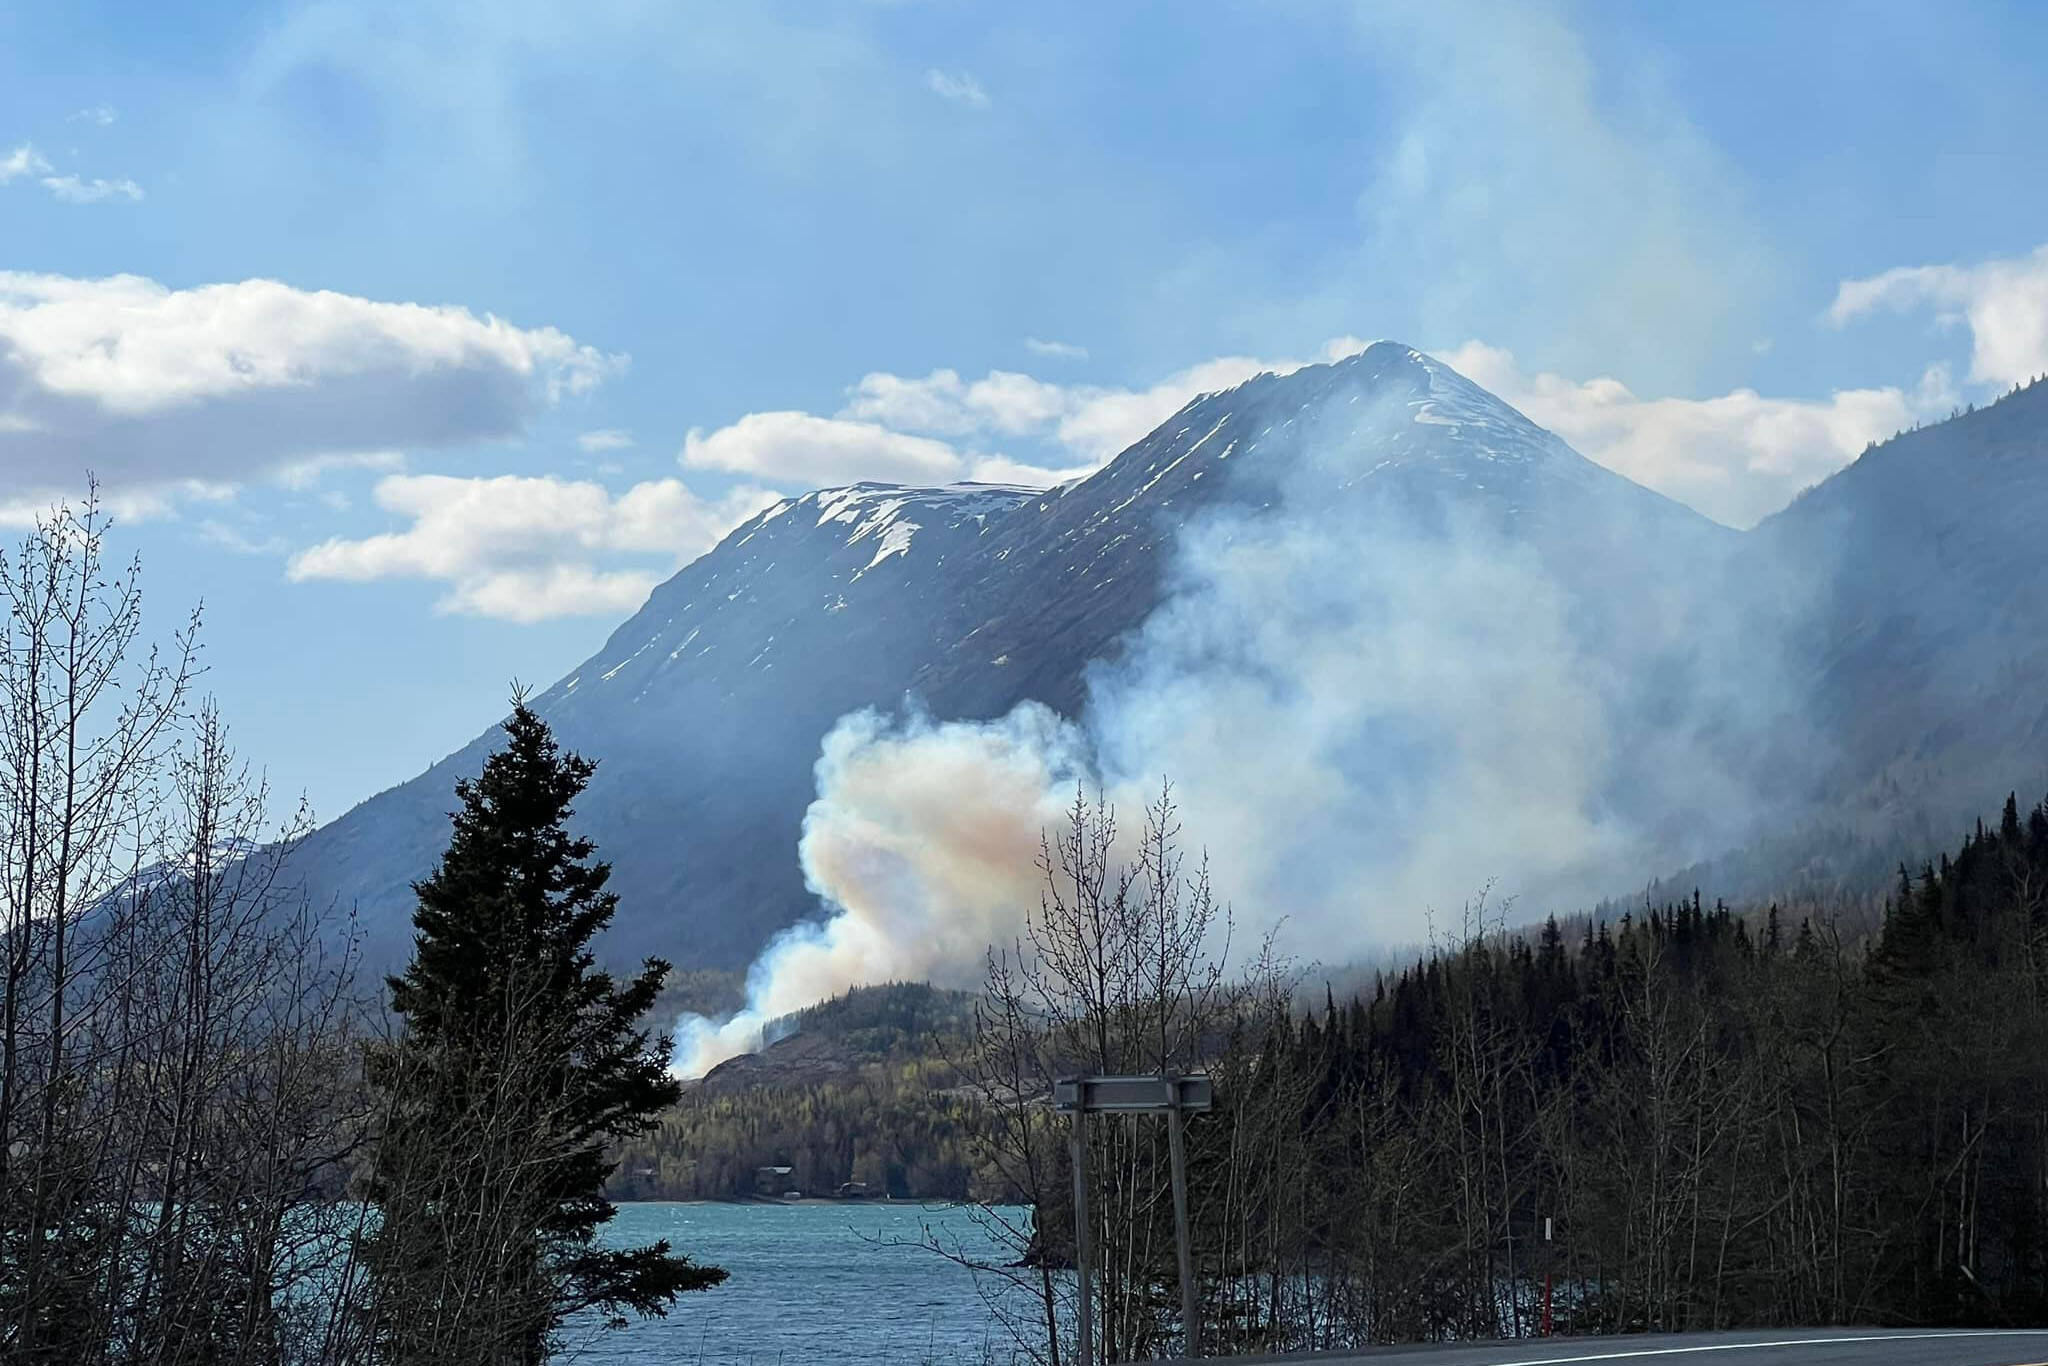 A wildfire burns near Milepost 46.5 of the Sterling Highway on Tuesday, May 10, 2022 near Cooper Landing, Alaska. (Photo courtesy Cooper Landing Emergency Services)